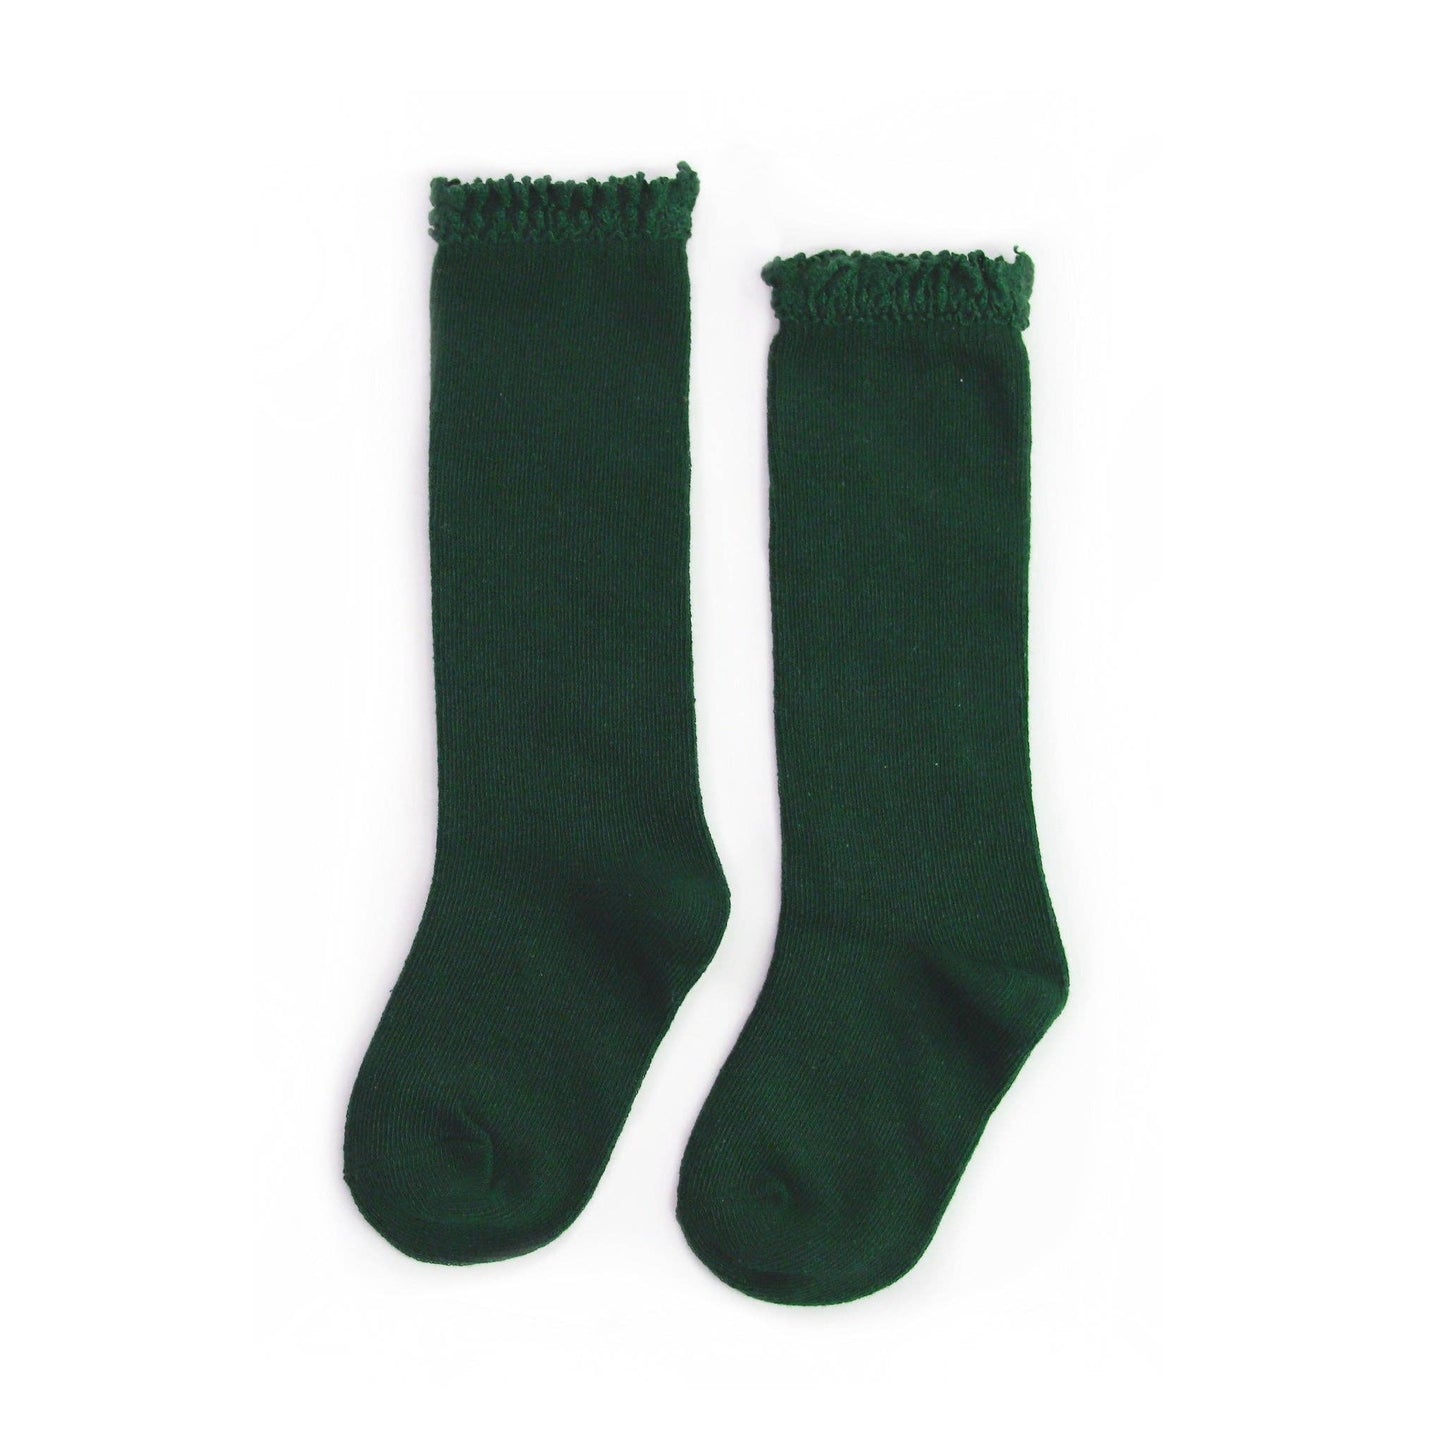 Little Stocking Co. - Forest Lace Top Knee High Socks: 1.5-3 YEARS